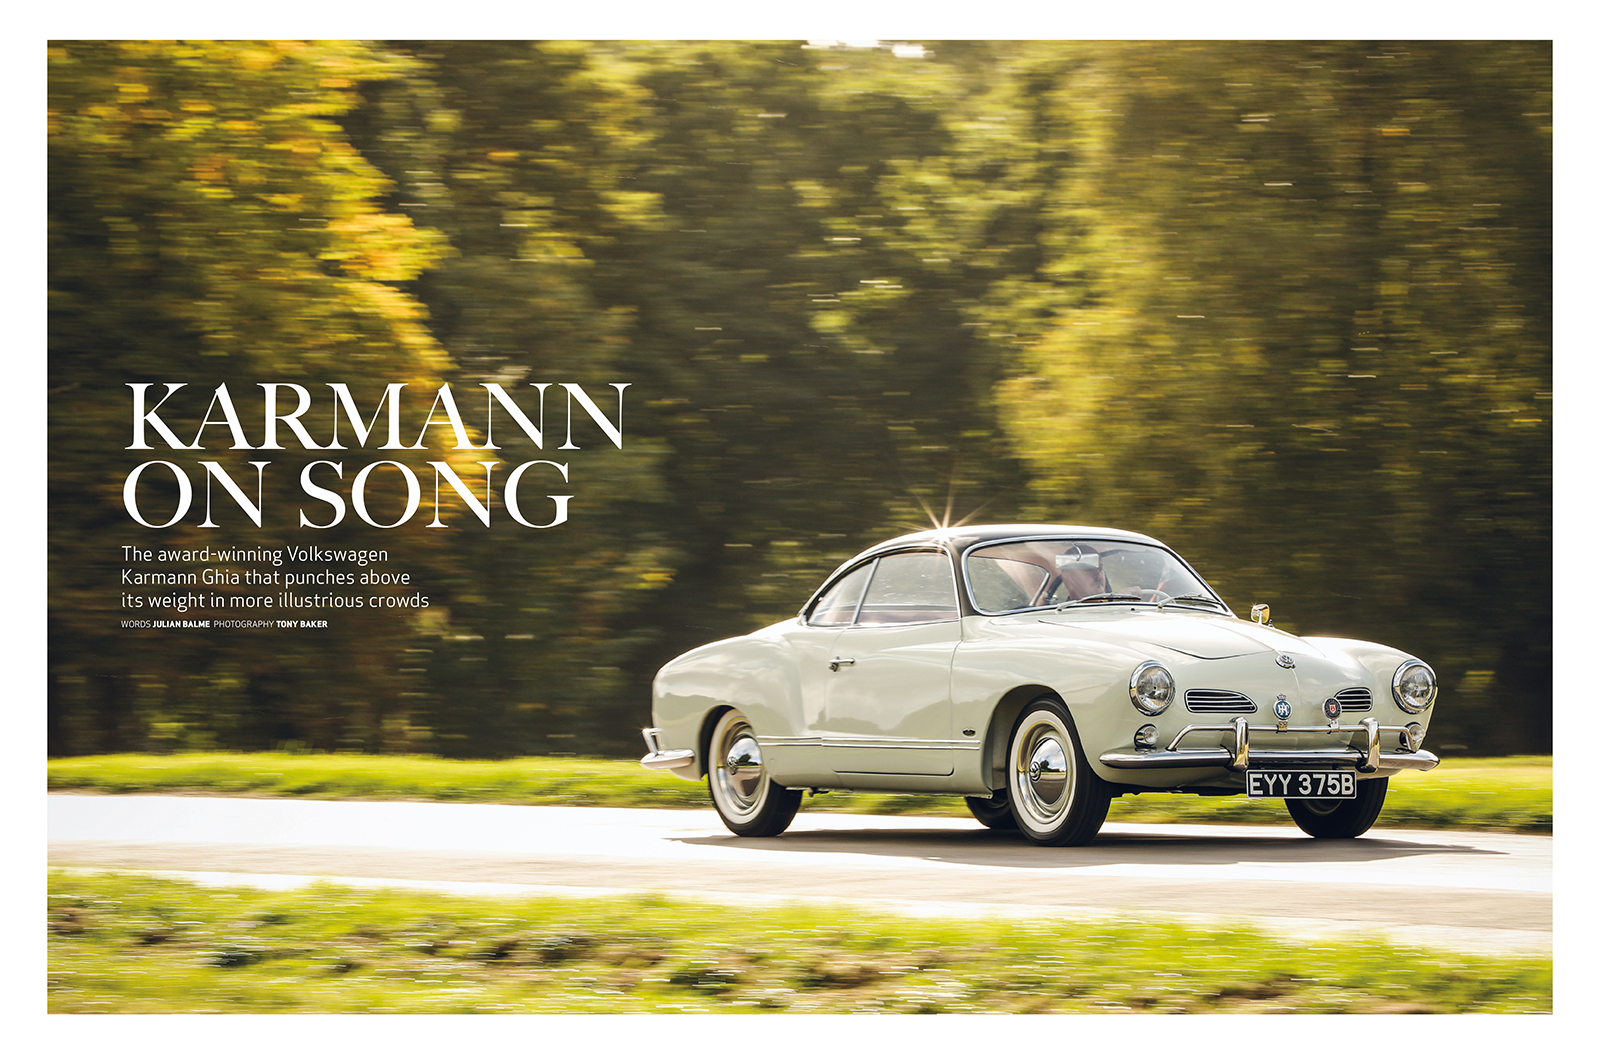 Classic & Sports Car – Duetto dreaming: Inside the May 2019 issue of C&SC